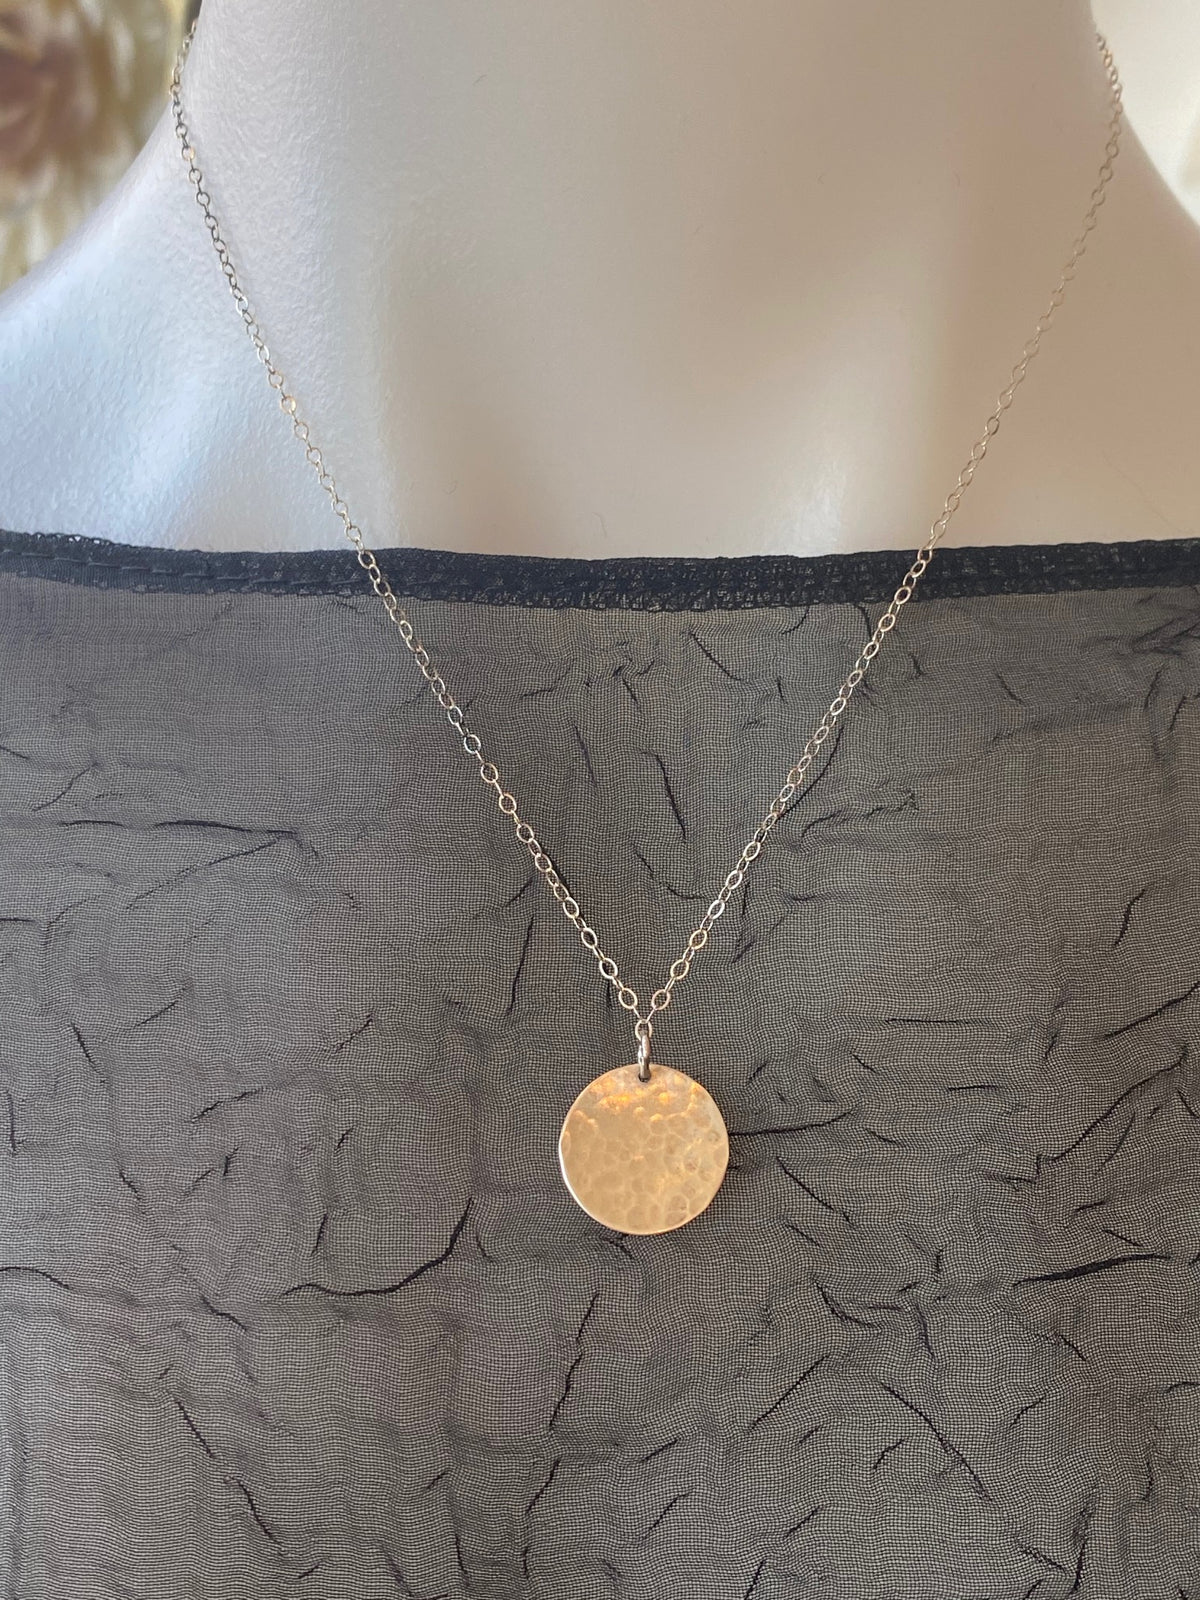 Vannucci Silver Disk Necklace